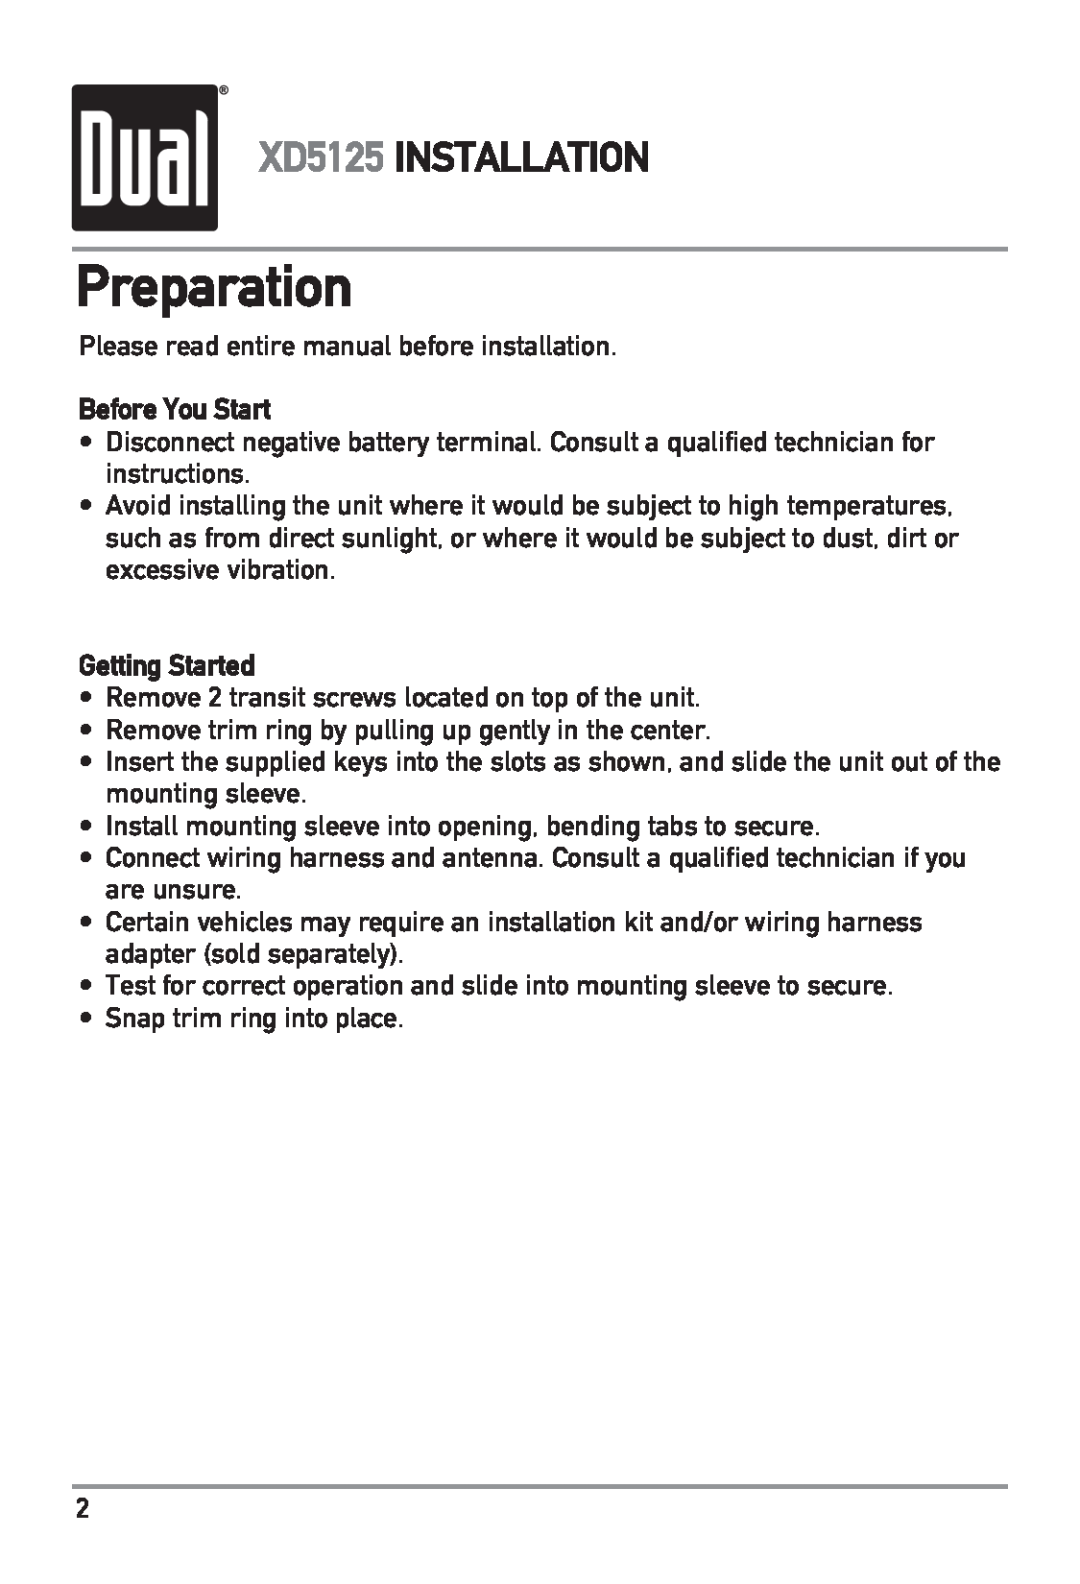 Dual owner manual Preparation, XD5125 INSTALLATION, Before You Start, Getting Started 